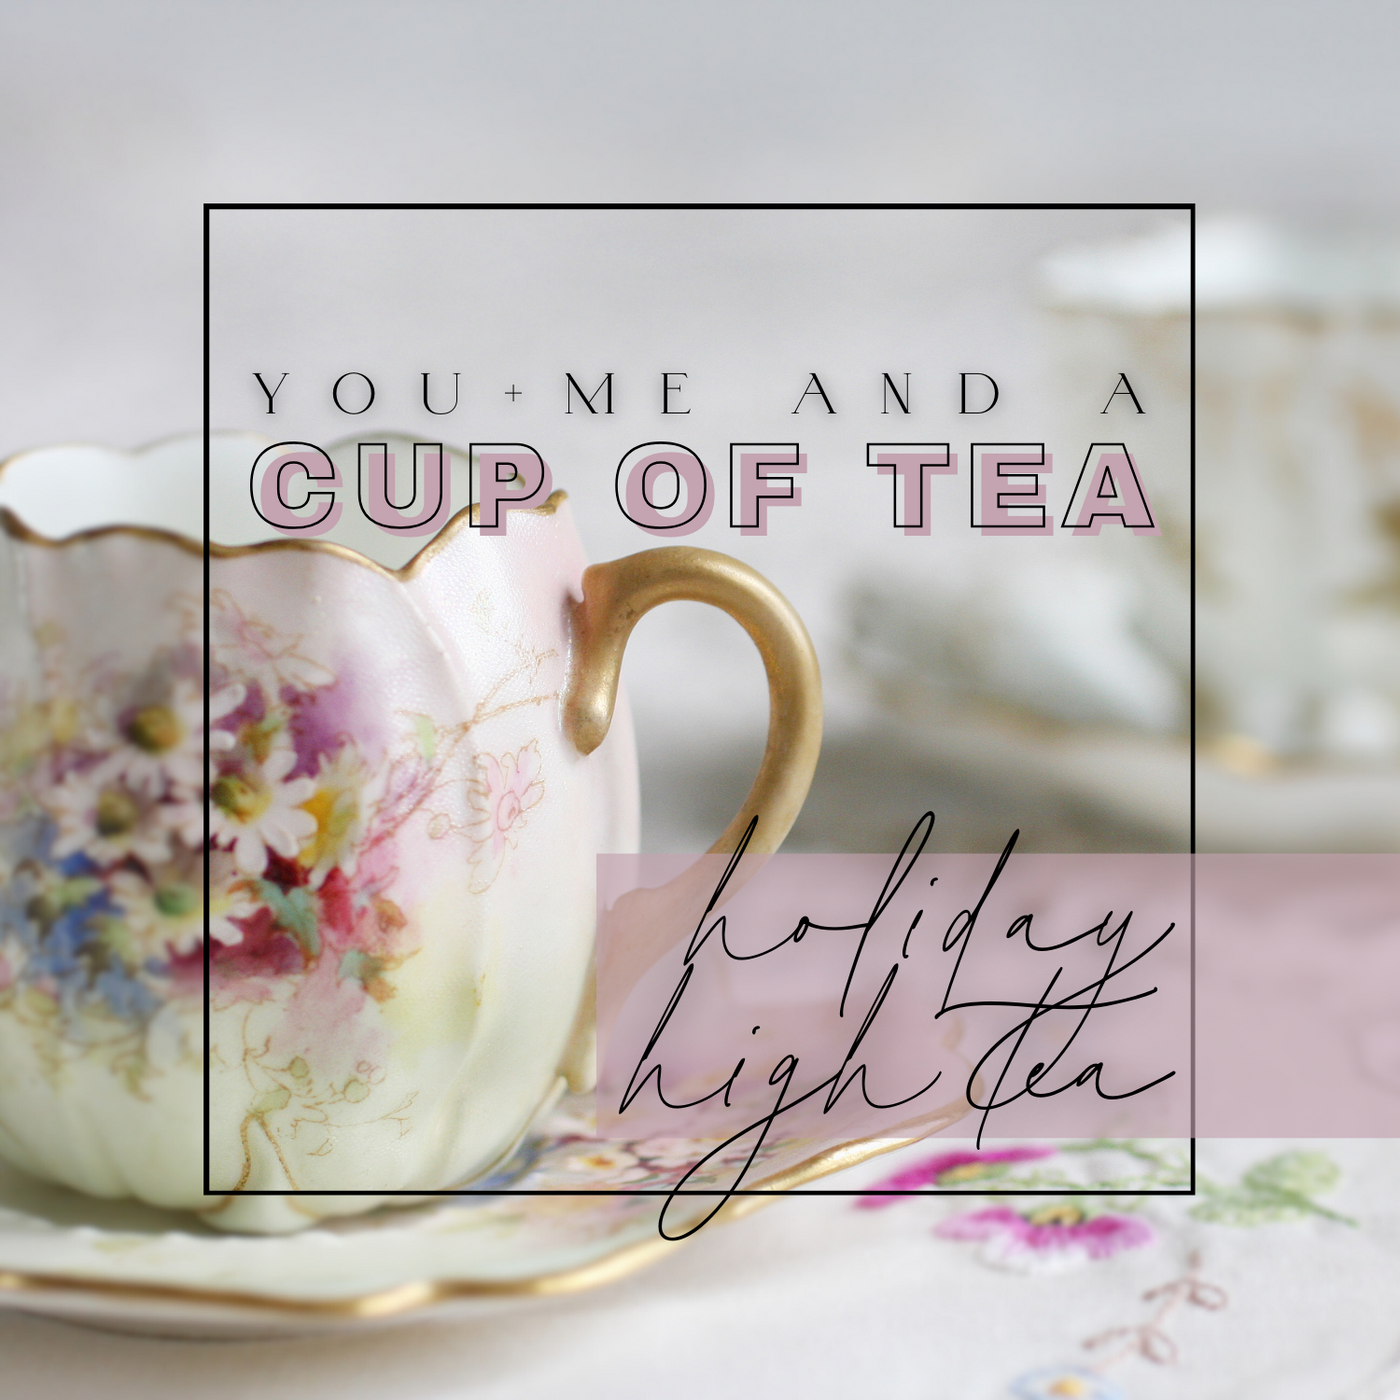 You, Me, and a Cup of Tea - Holiday High Tea